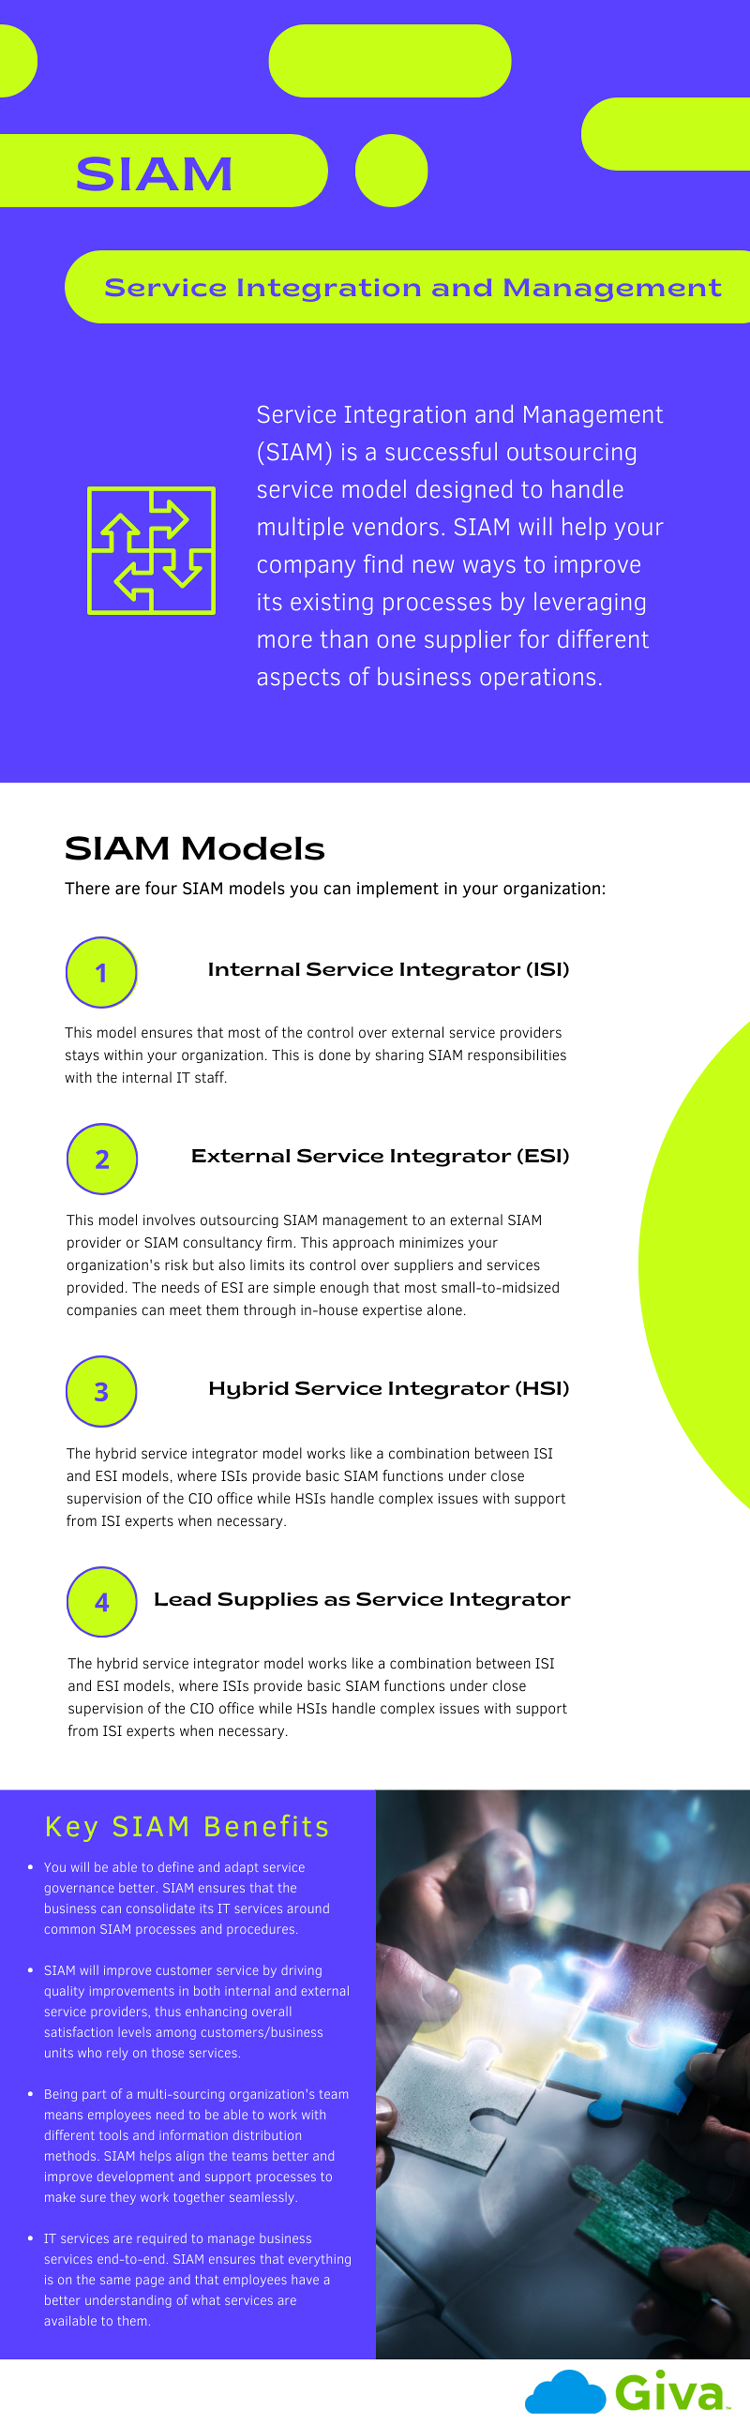 Service Integration and Management (SIAM) Infographic